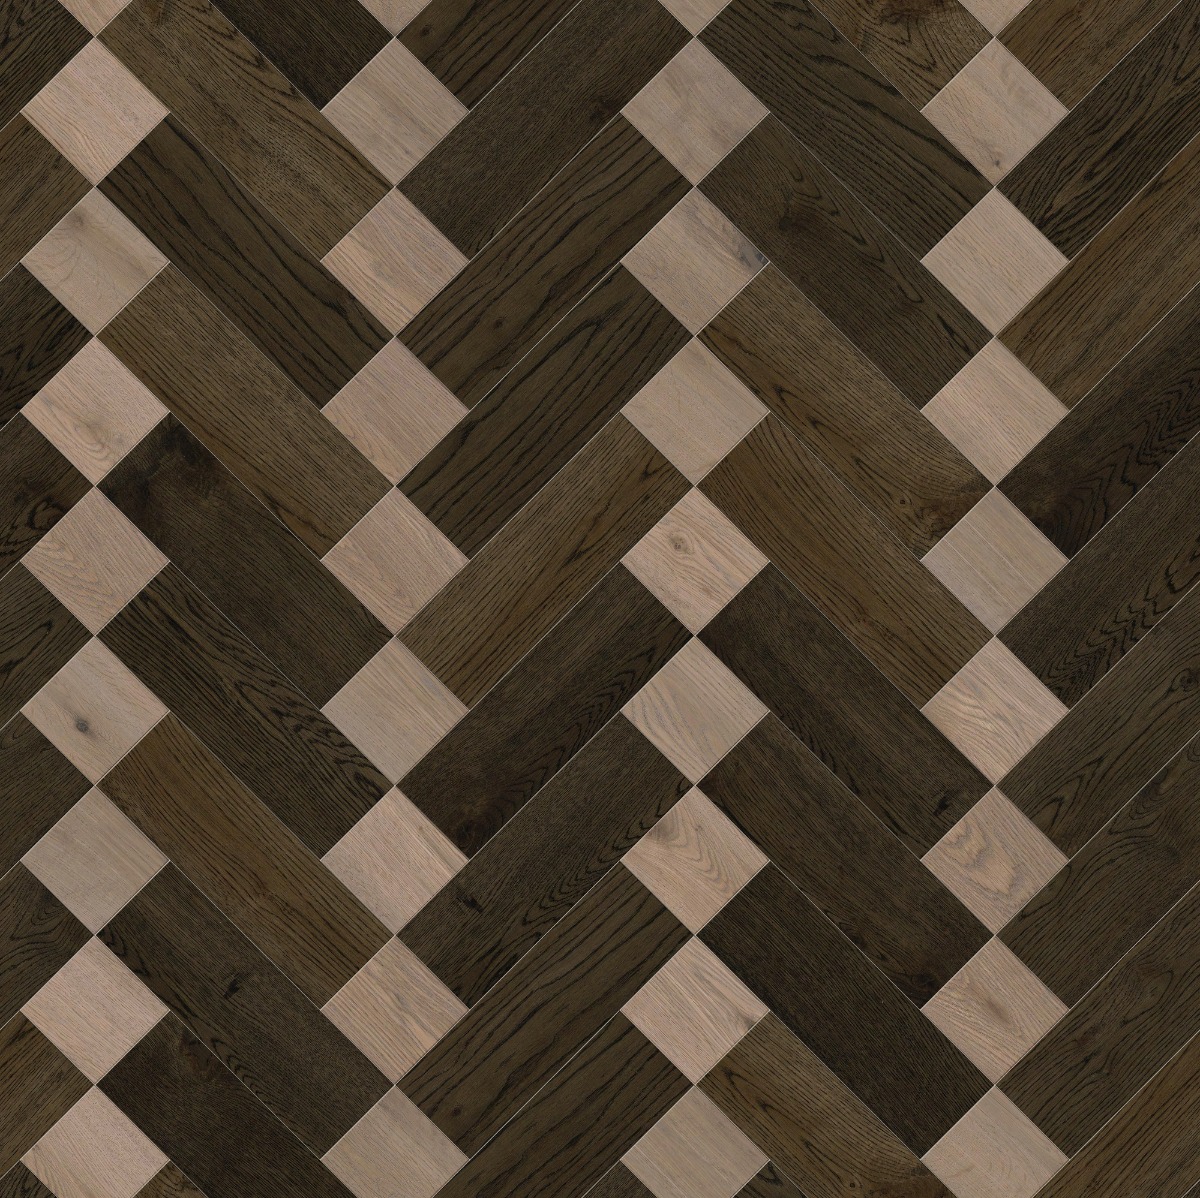 A seamless wood texture with creative oak 4108 boards arranged in a  pattern